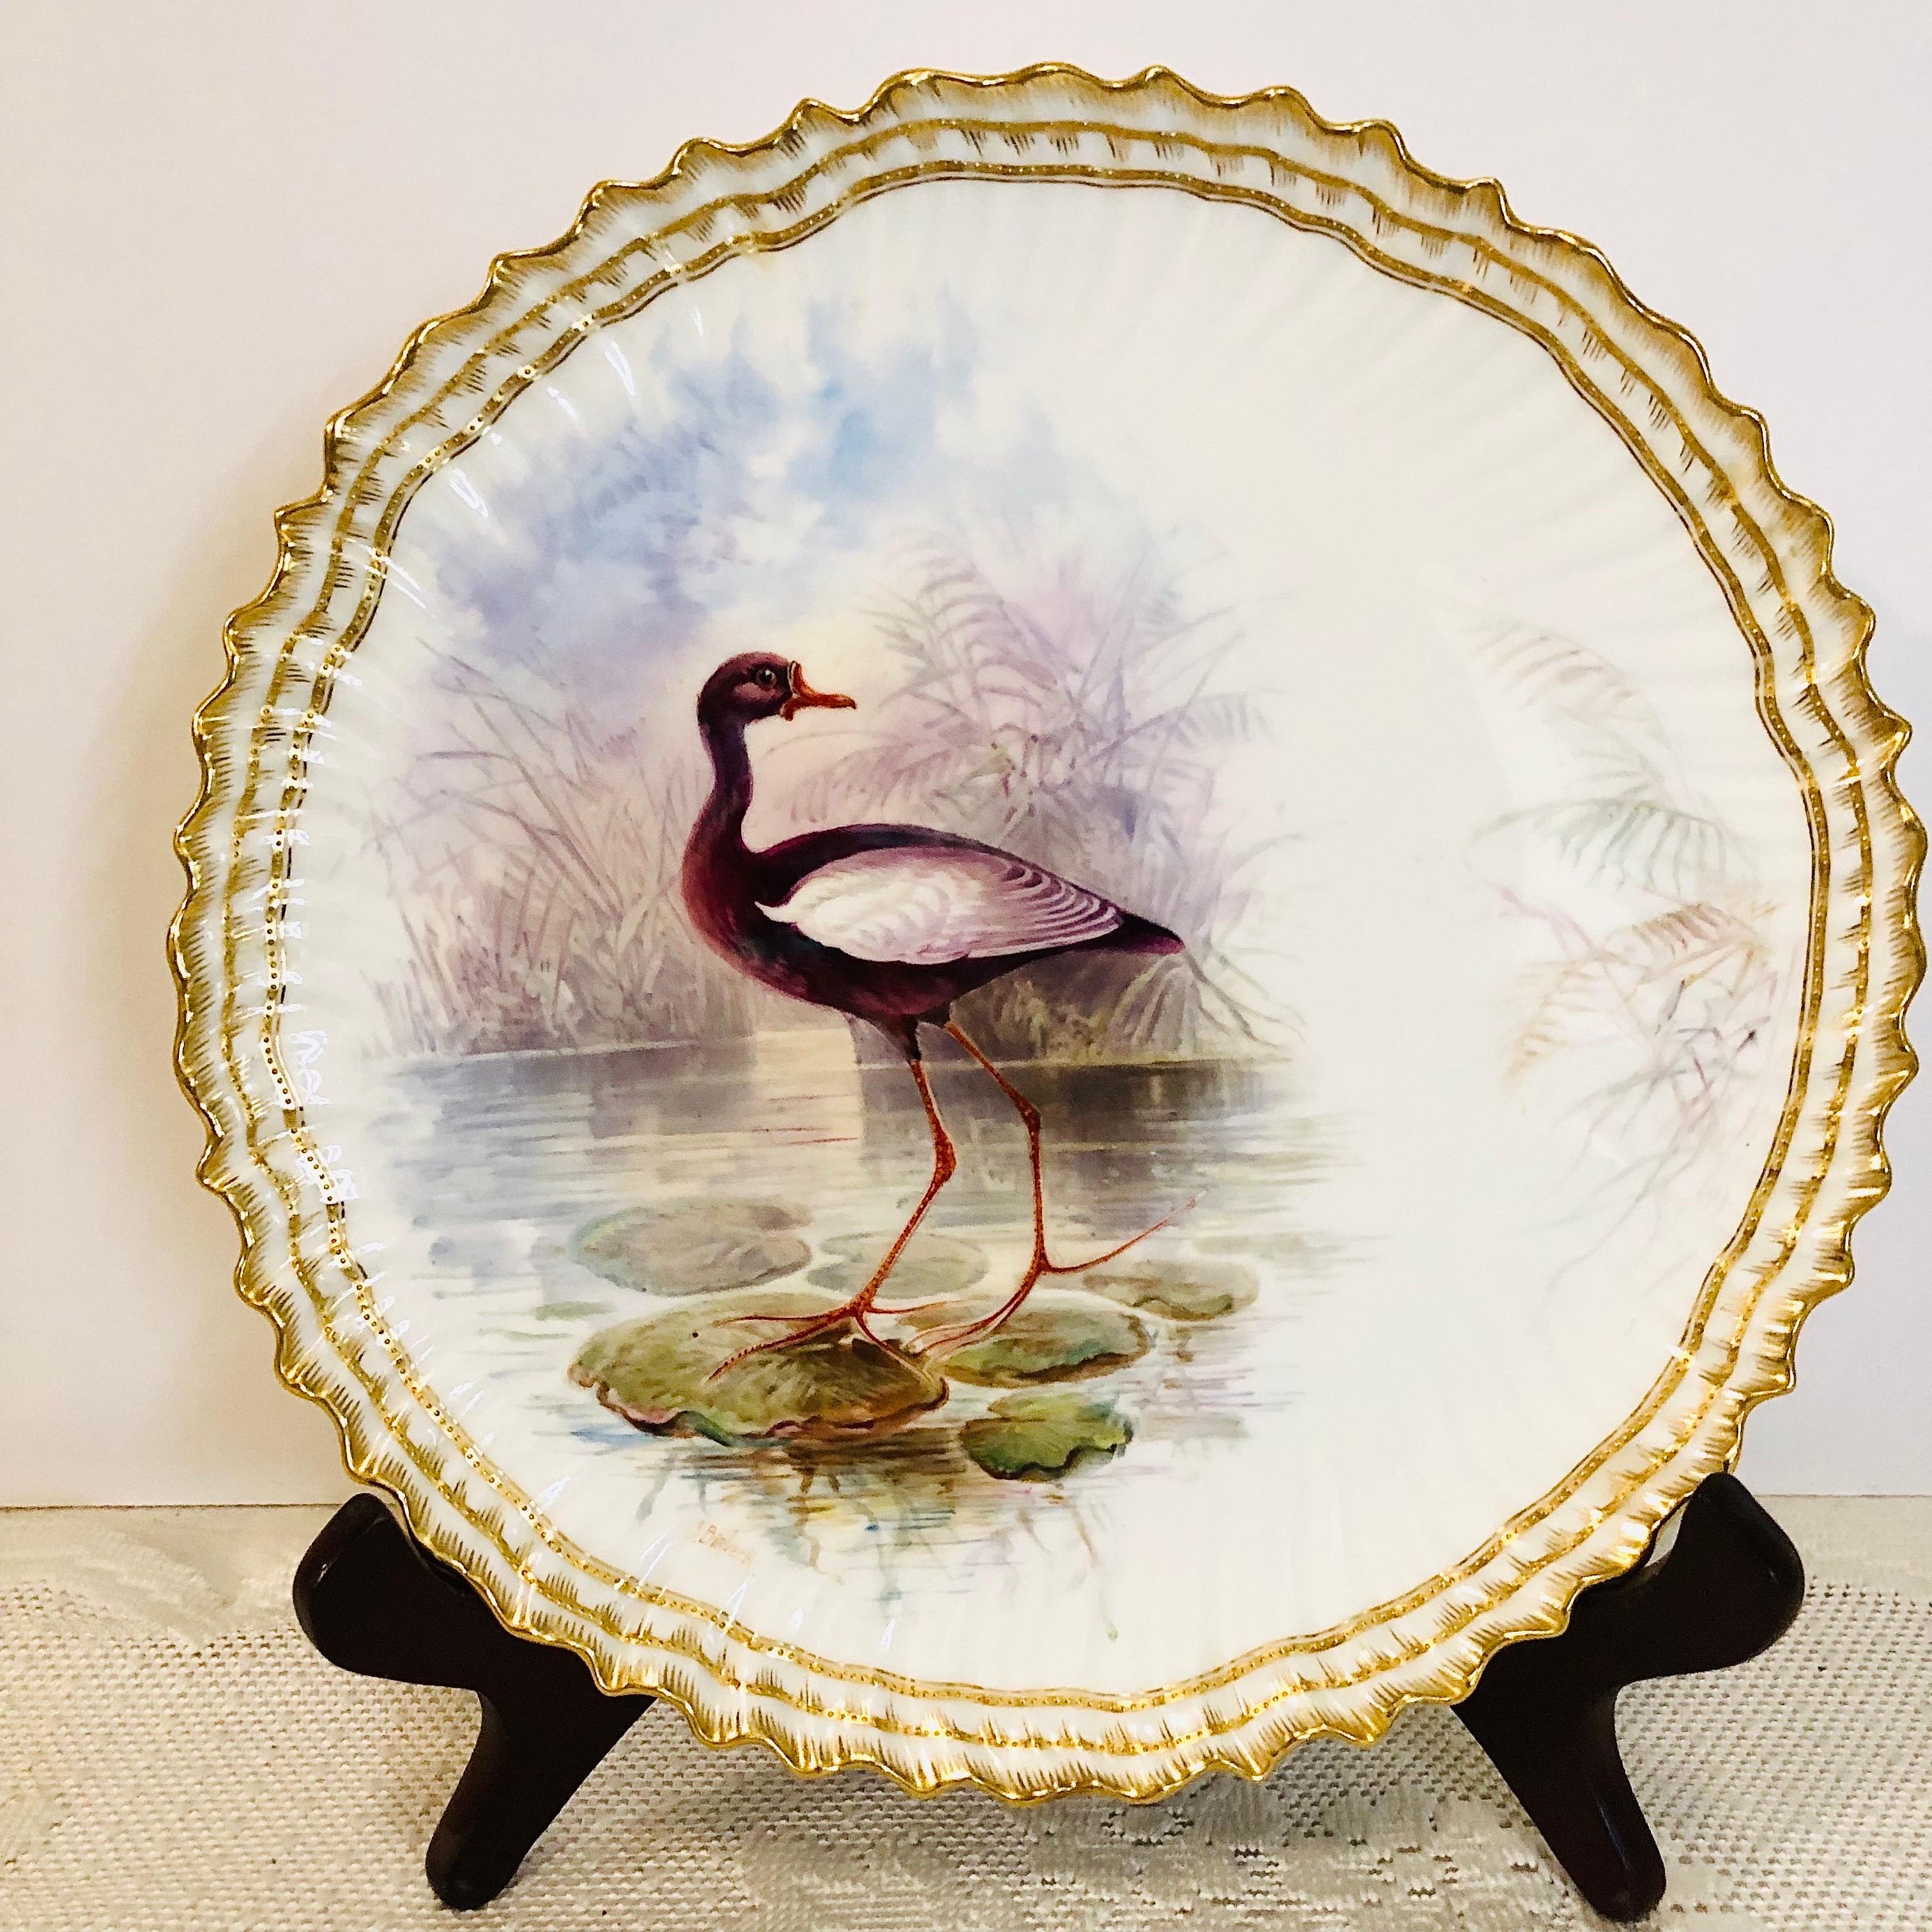 Set of 11 Cauldon Plates Each Painted Exquisitely With a Different Bird  9